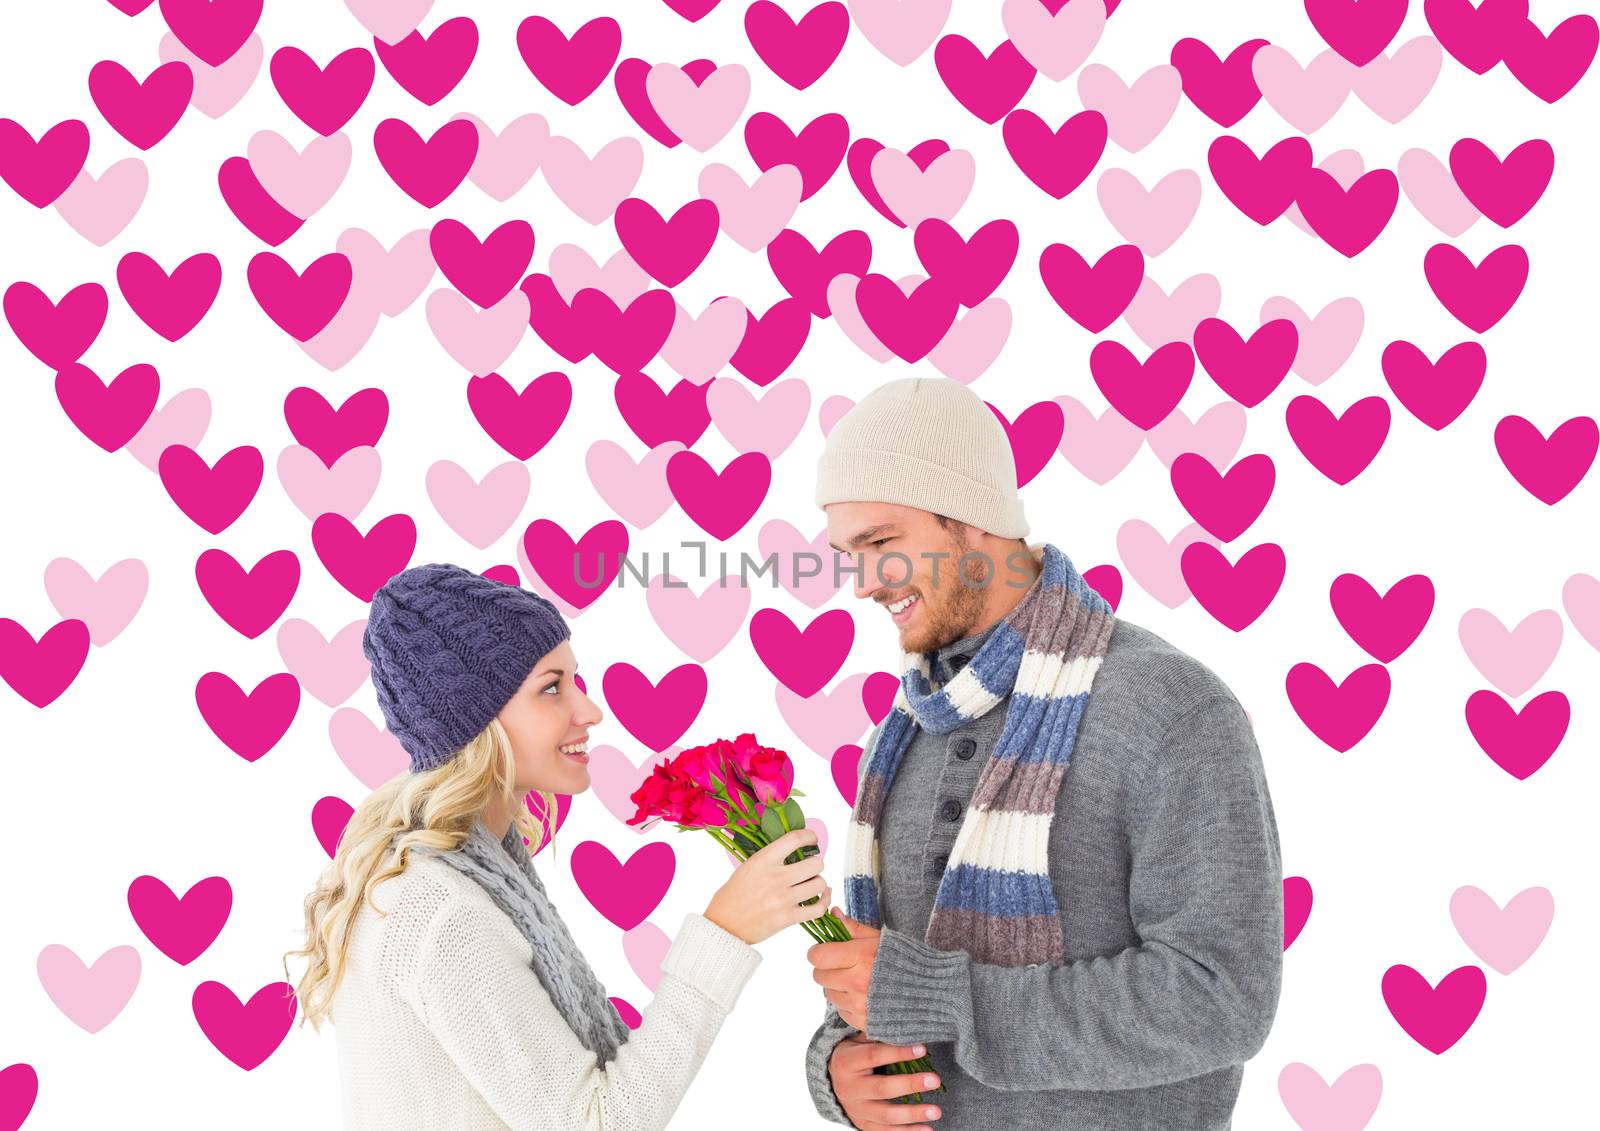 Attractive man in winter fashion offering roses to girlfriend against valentines day pattern